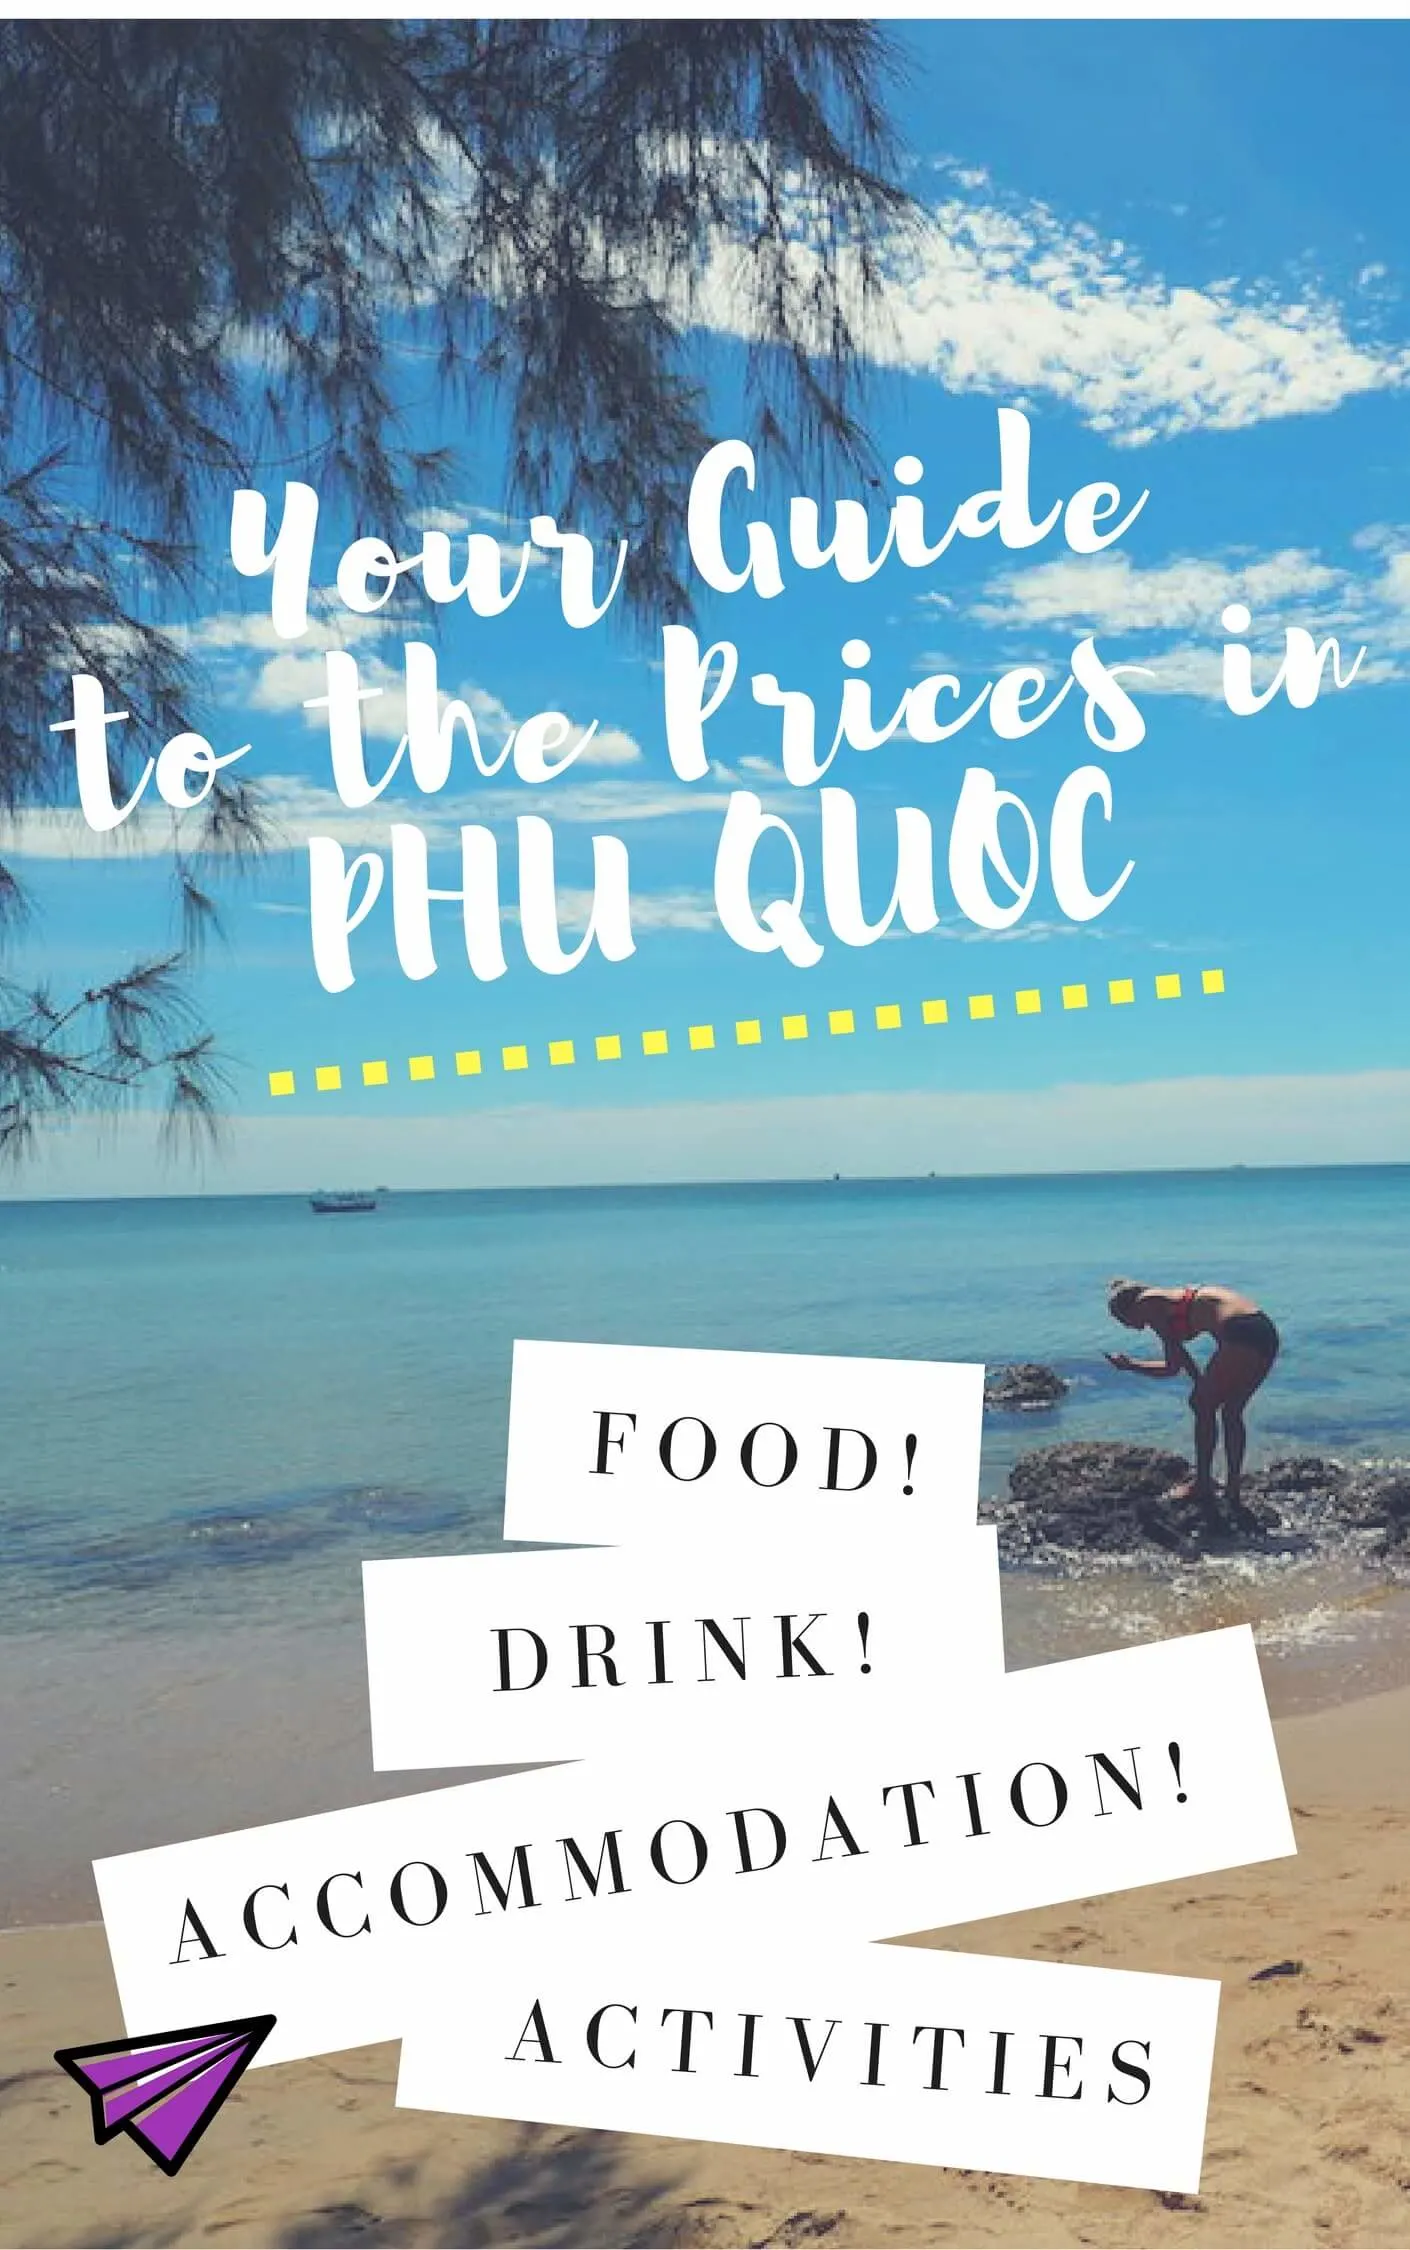 Cost of Phu Quoc